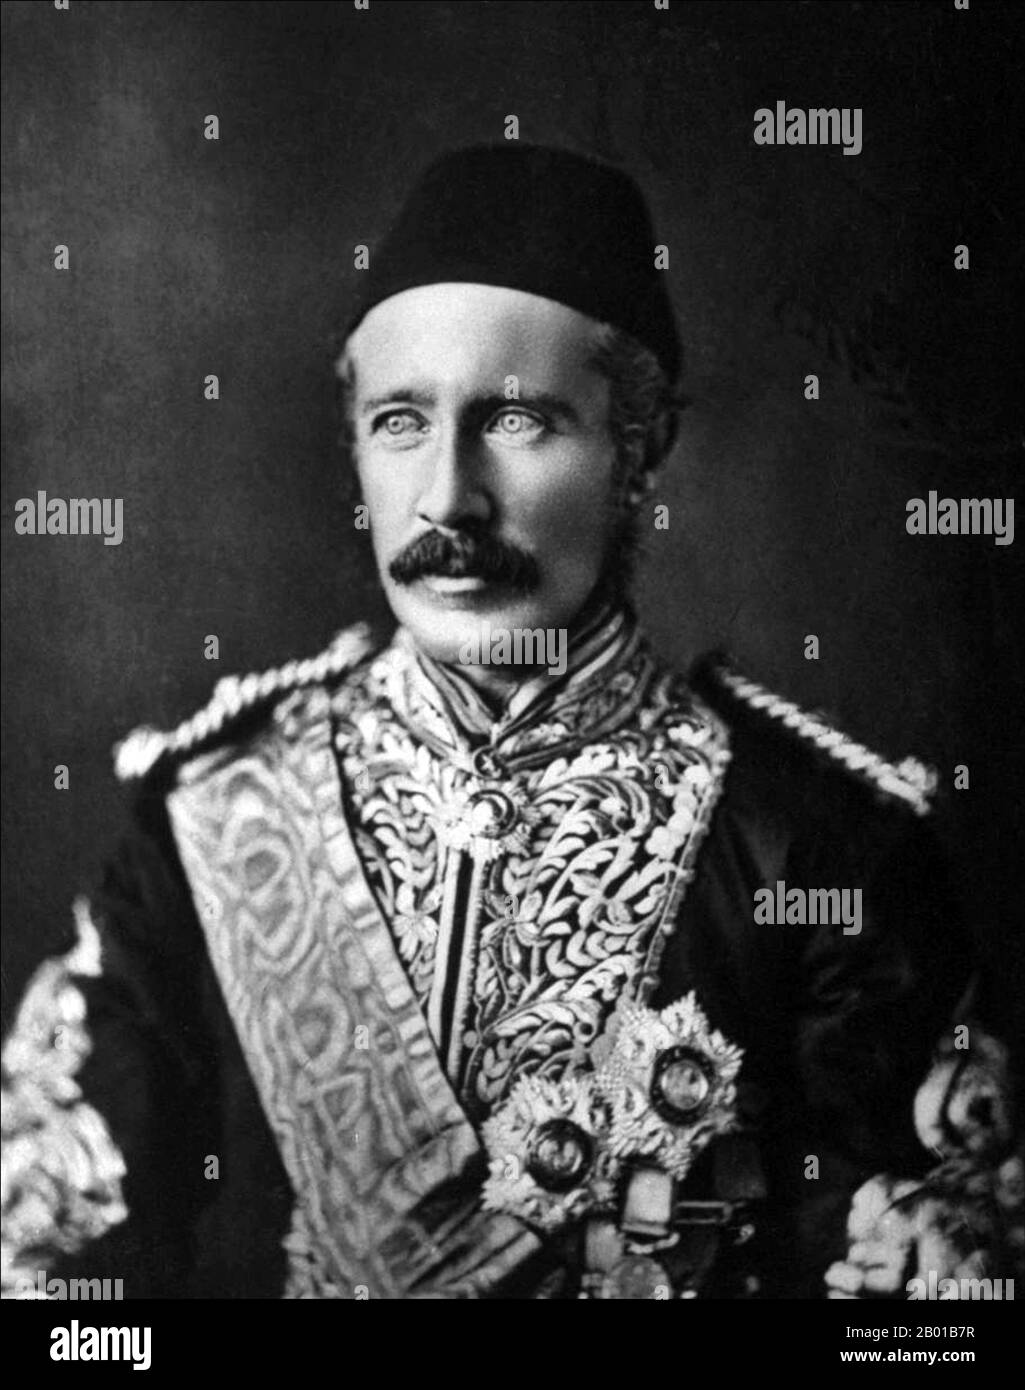 Great Britain: Major-General Charles George Gordon CB (28 January 1833 - 26 January 1885). Portrait, c. 1880s.  Major-General Charles George Gordon, also known as Chinese Gordon and Gordon Pasha, was a British Army officer and administrator who saw action in the Crimean War and in China. He served the Khedive of Egypt in 1873, becoming the Governor-General of the Sudan.  General Gordon was killed by Mahdist forces during the Mahdist War on January 26, 1885. The manner of his death is uncertain but it was romanticised in in the British media. Stock Photo